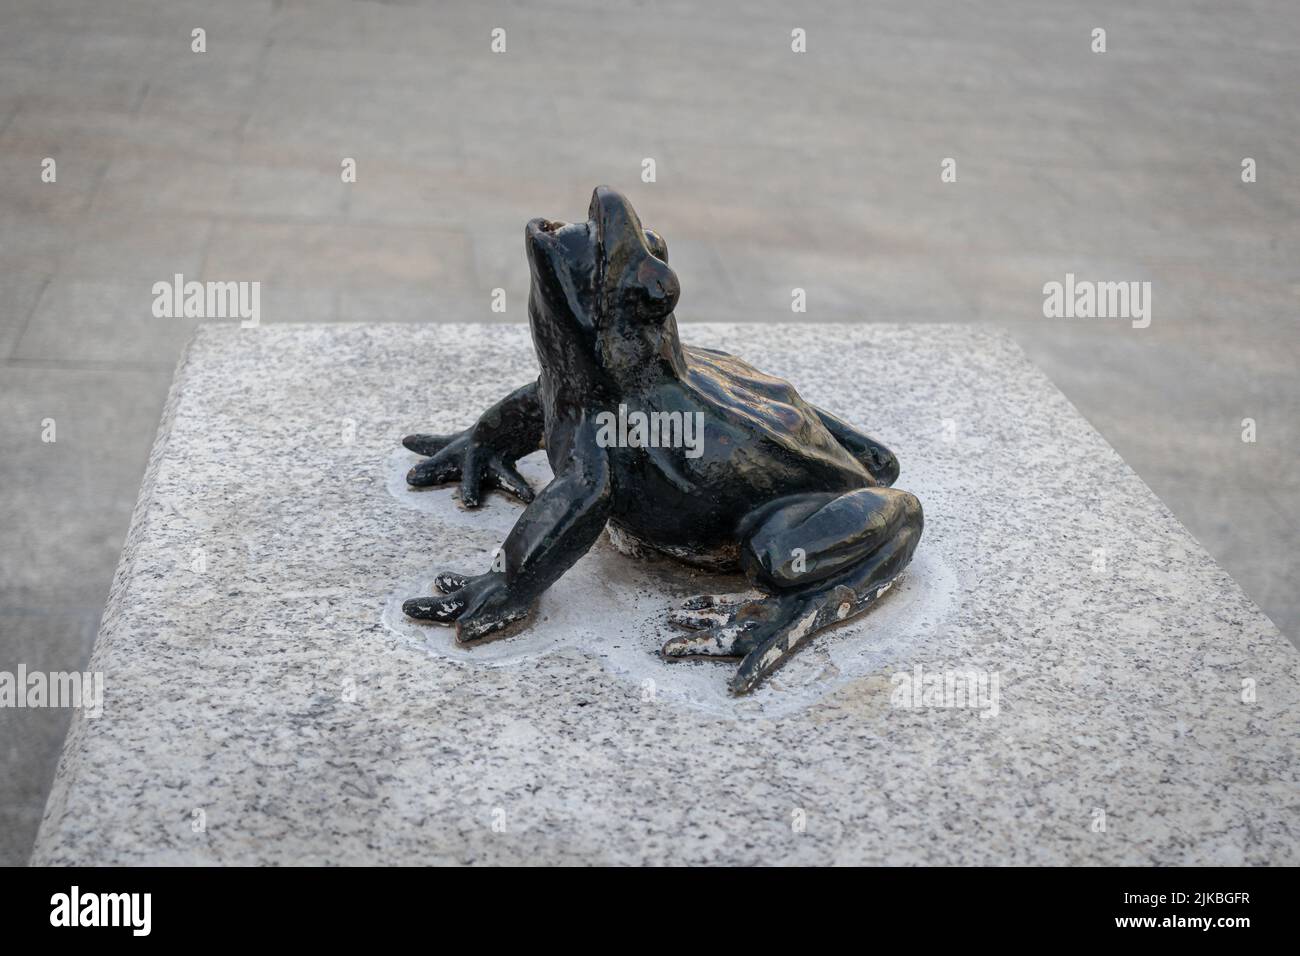 ZARAGOZA, SPAIN-MAY 15, 2021: Statue of the little frog in the center of the City Stock Photo